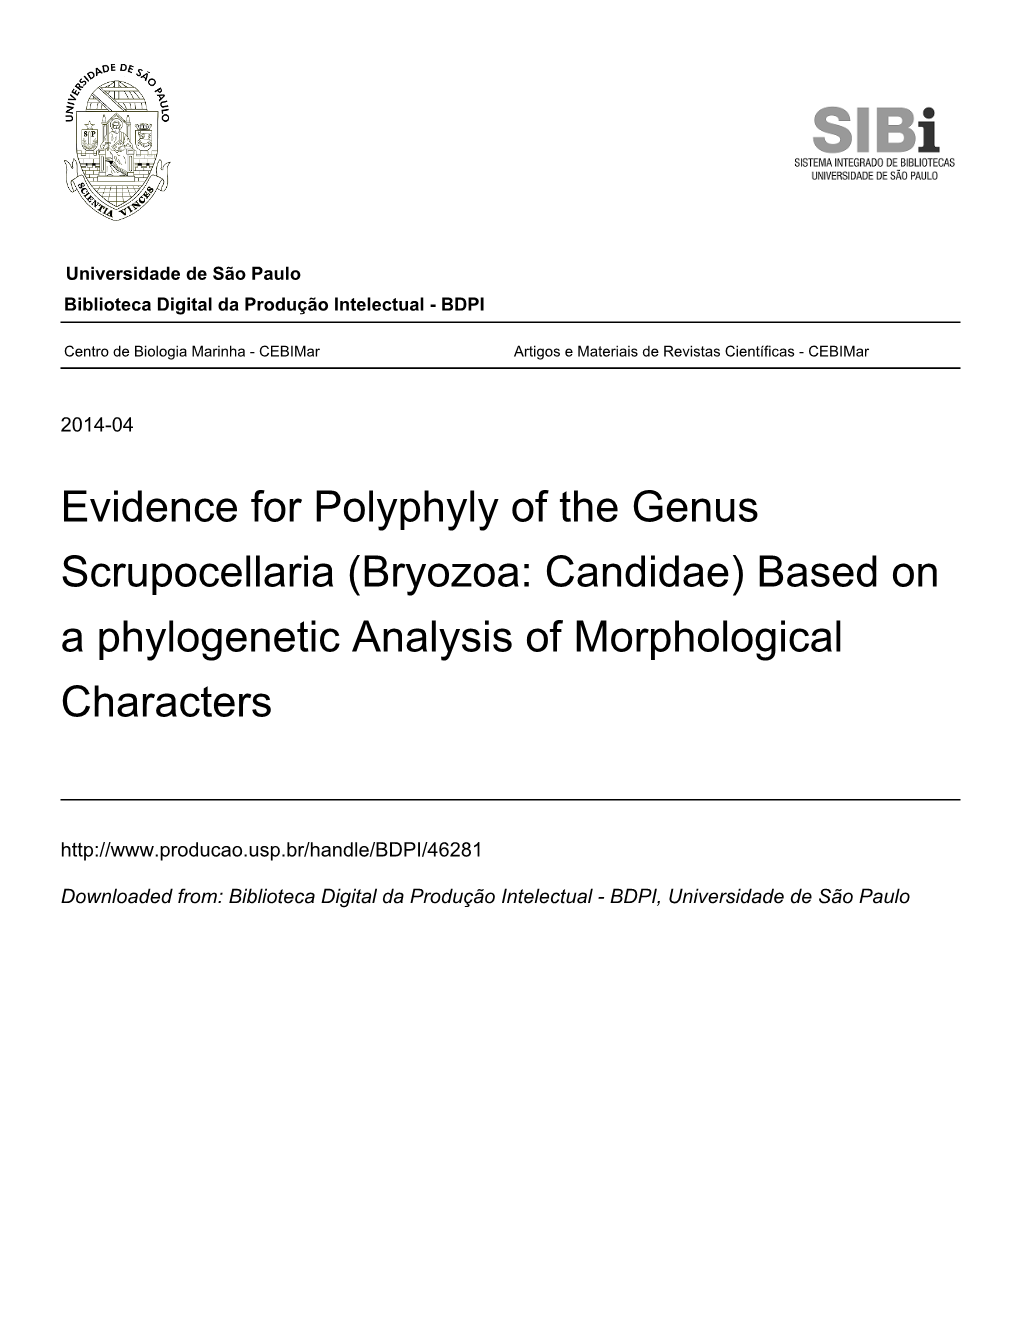 Evidence for Polyphyly of the Genus Scrupocellaria (Bryozoa: Candidae) Based on a Phylogenetic Analysis of Morphological Characters